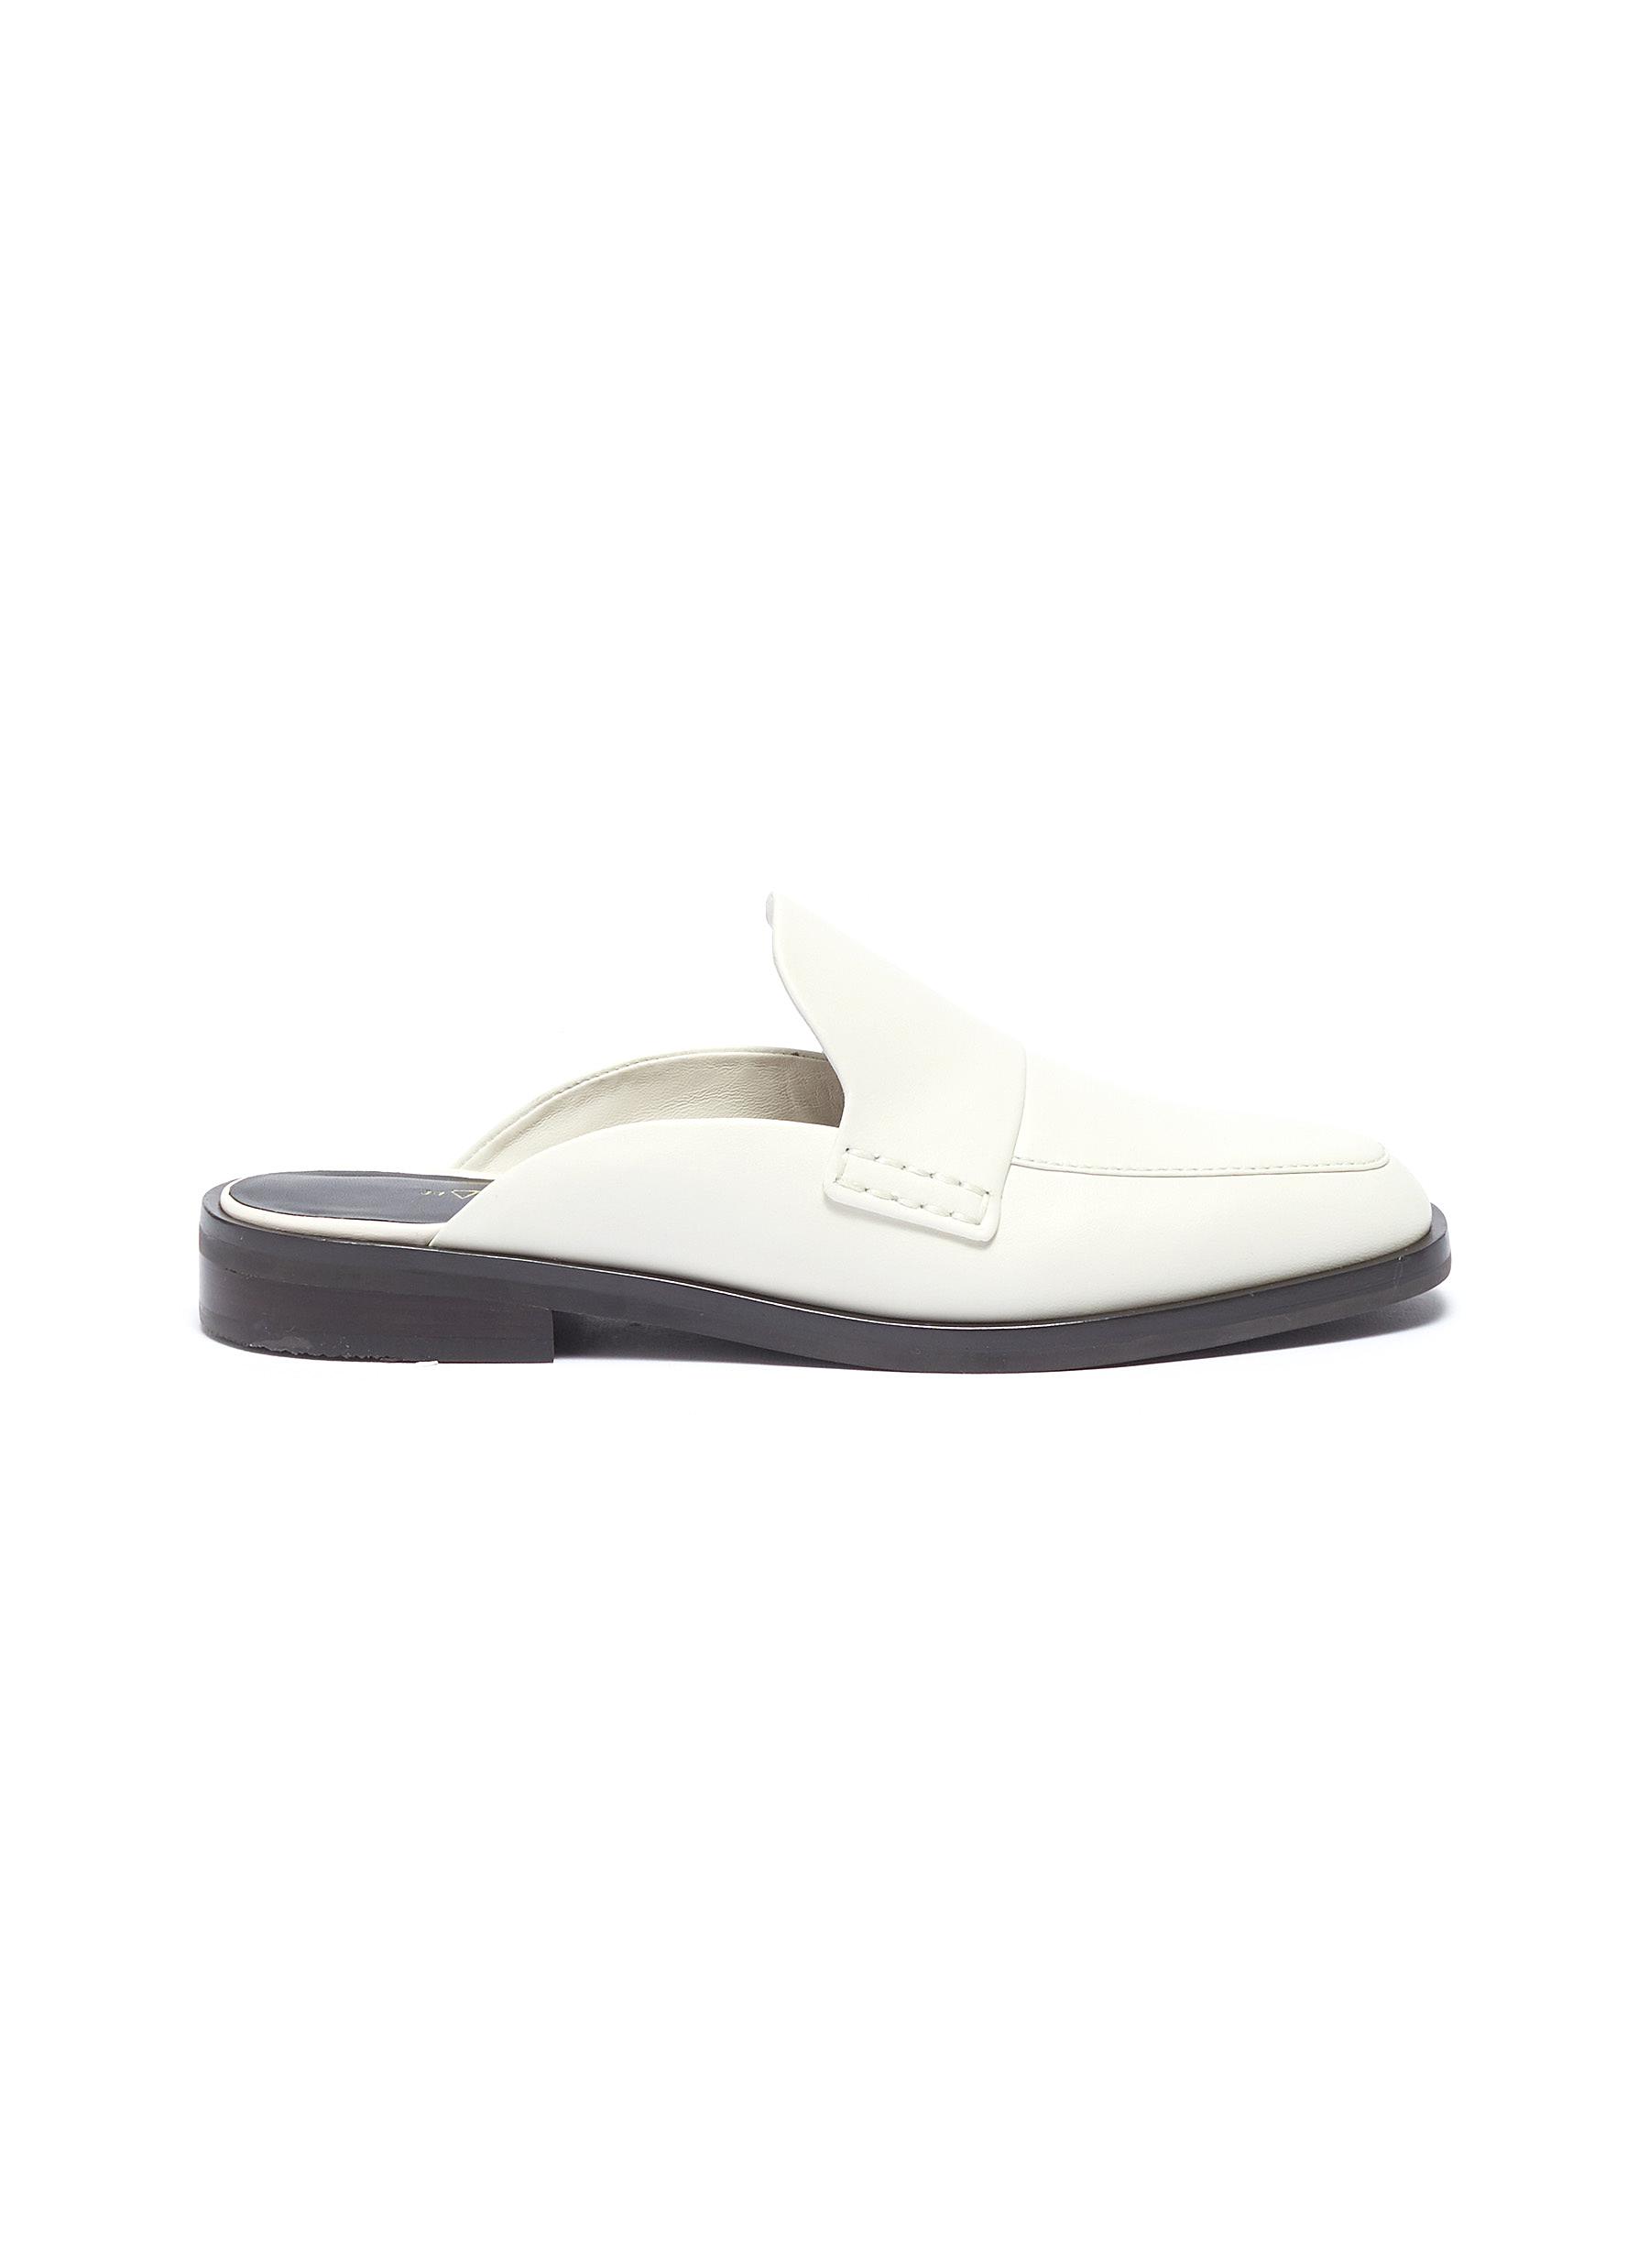 Alexa leather loafer slides by 3.1 Phillip Lim | Coshio Online Shop